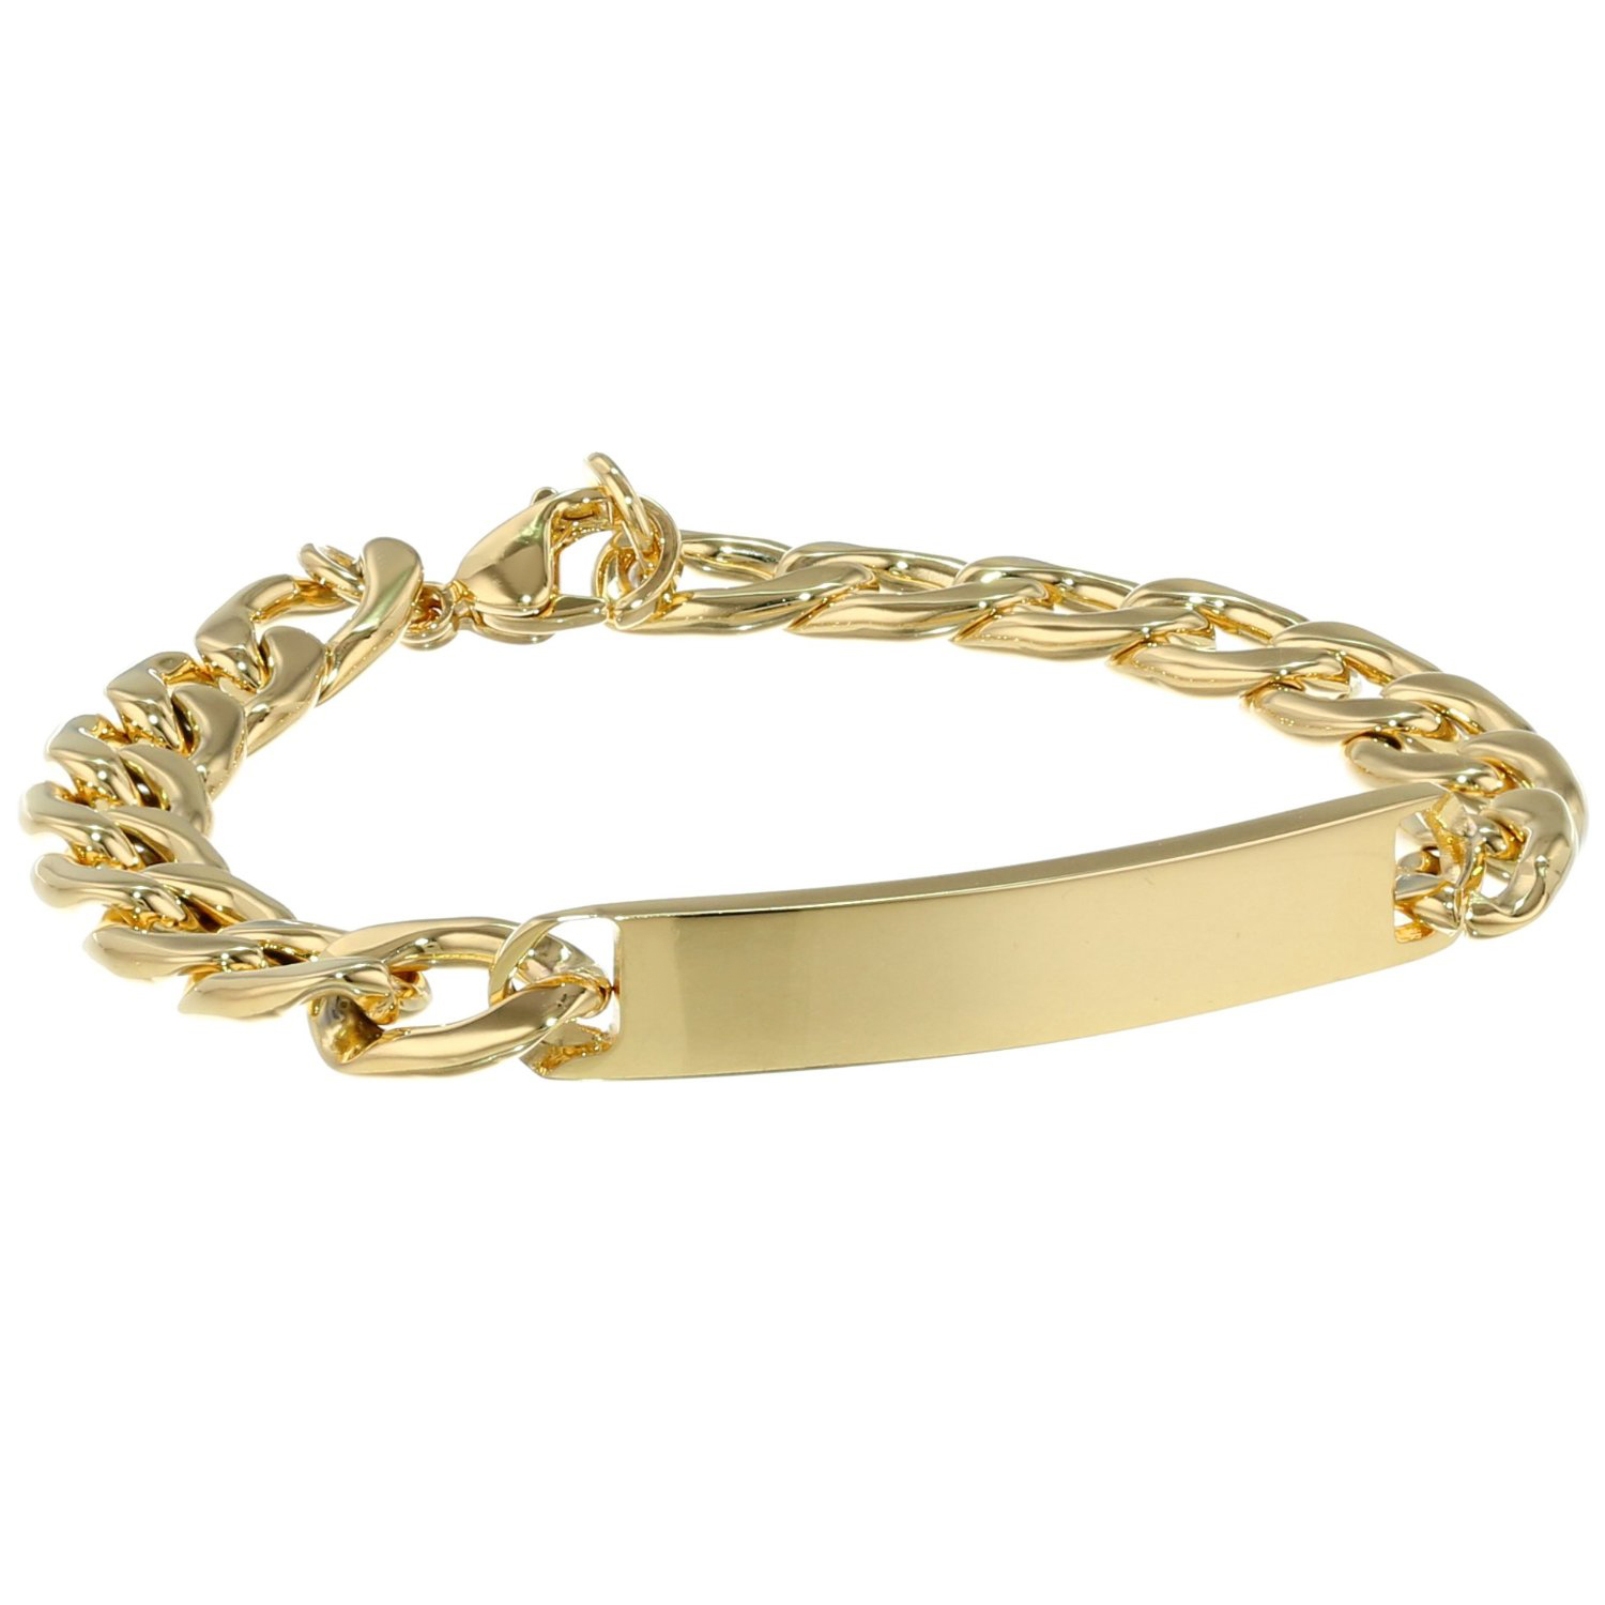 Curb Identification Bracelet in Gold Ion Plated Stainless Steel - 6mm